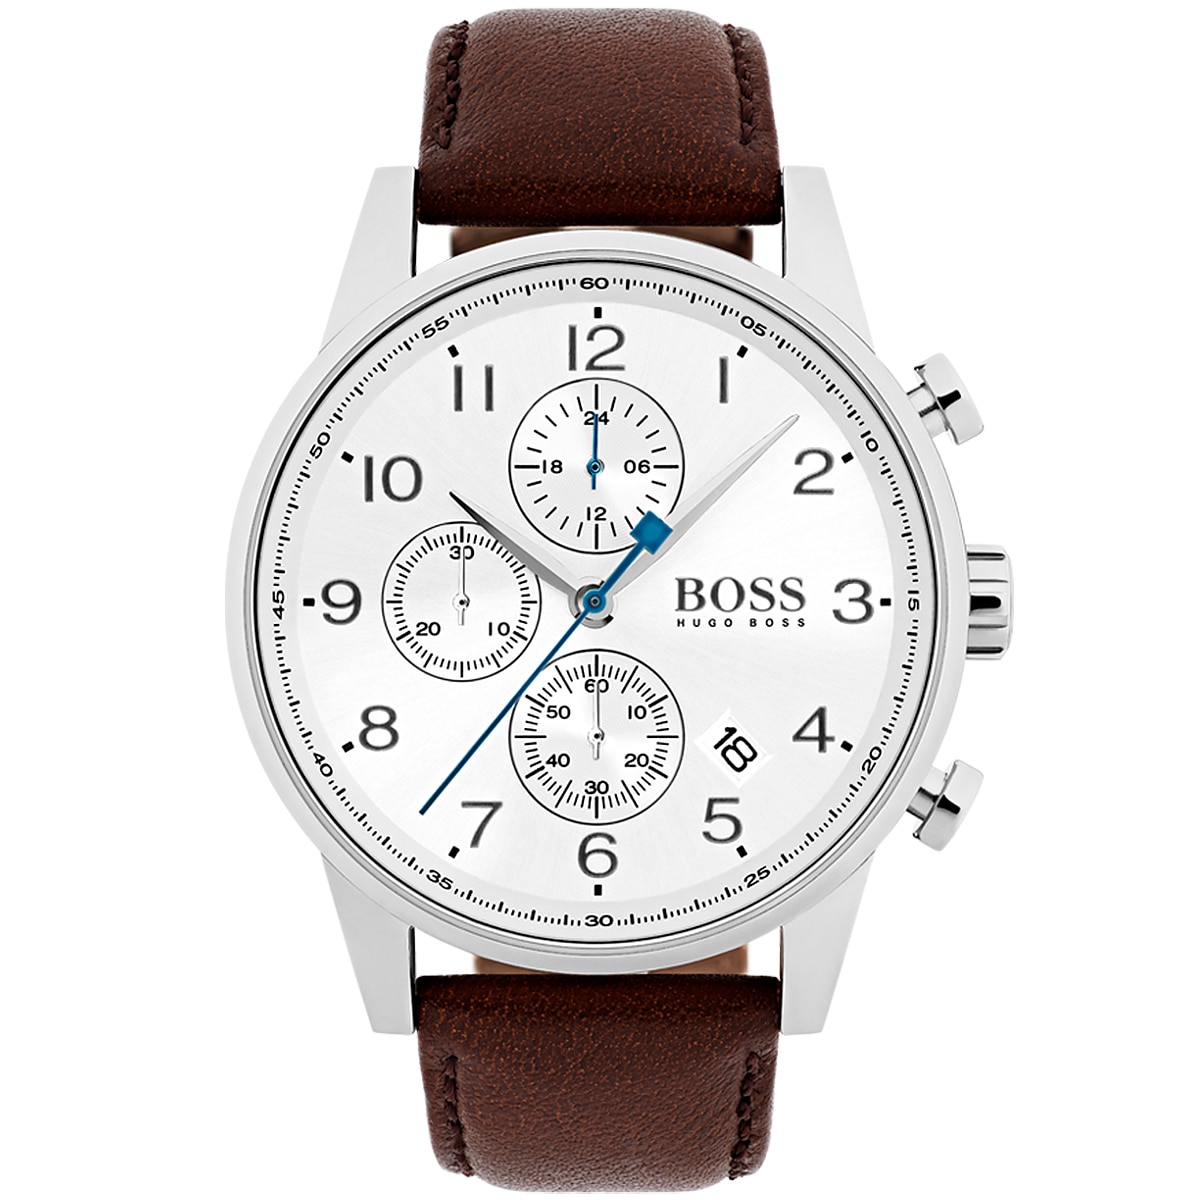 boss watch brown leather strap